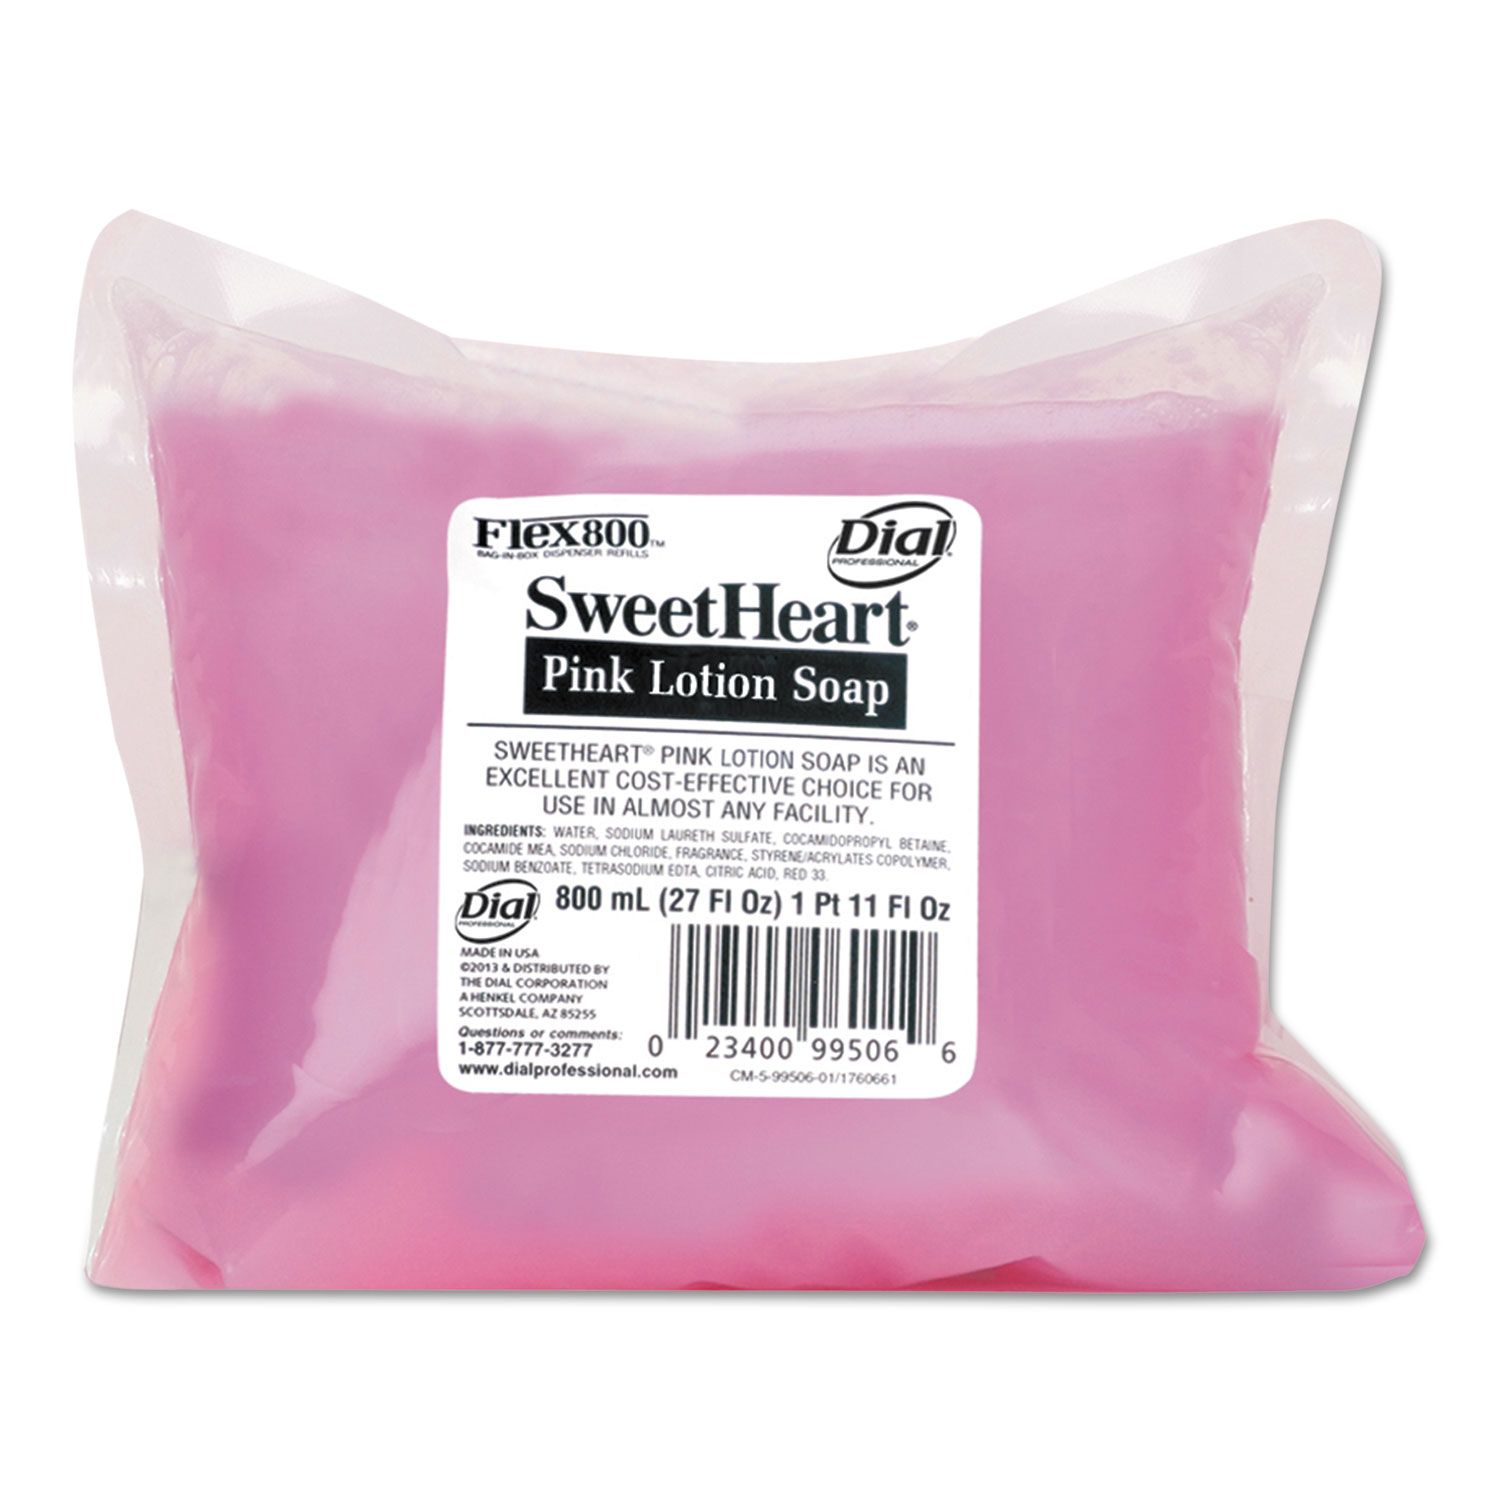  Sweetheart DIA 99506 Pearlescent Pink Lotion Soap, Fruity/Floral Scent, 800mL Refill, 12/Carton (DIA99506) 